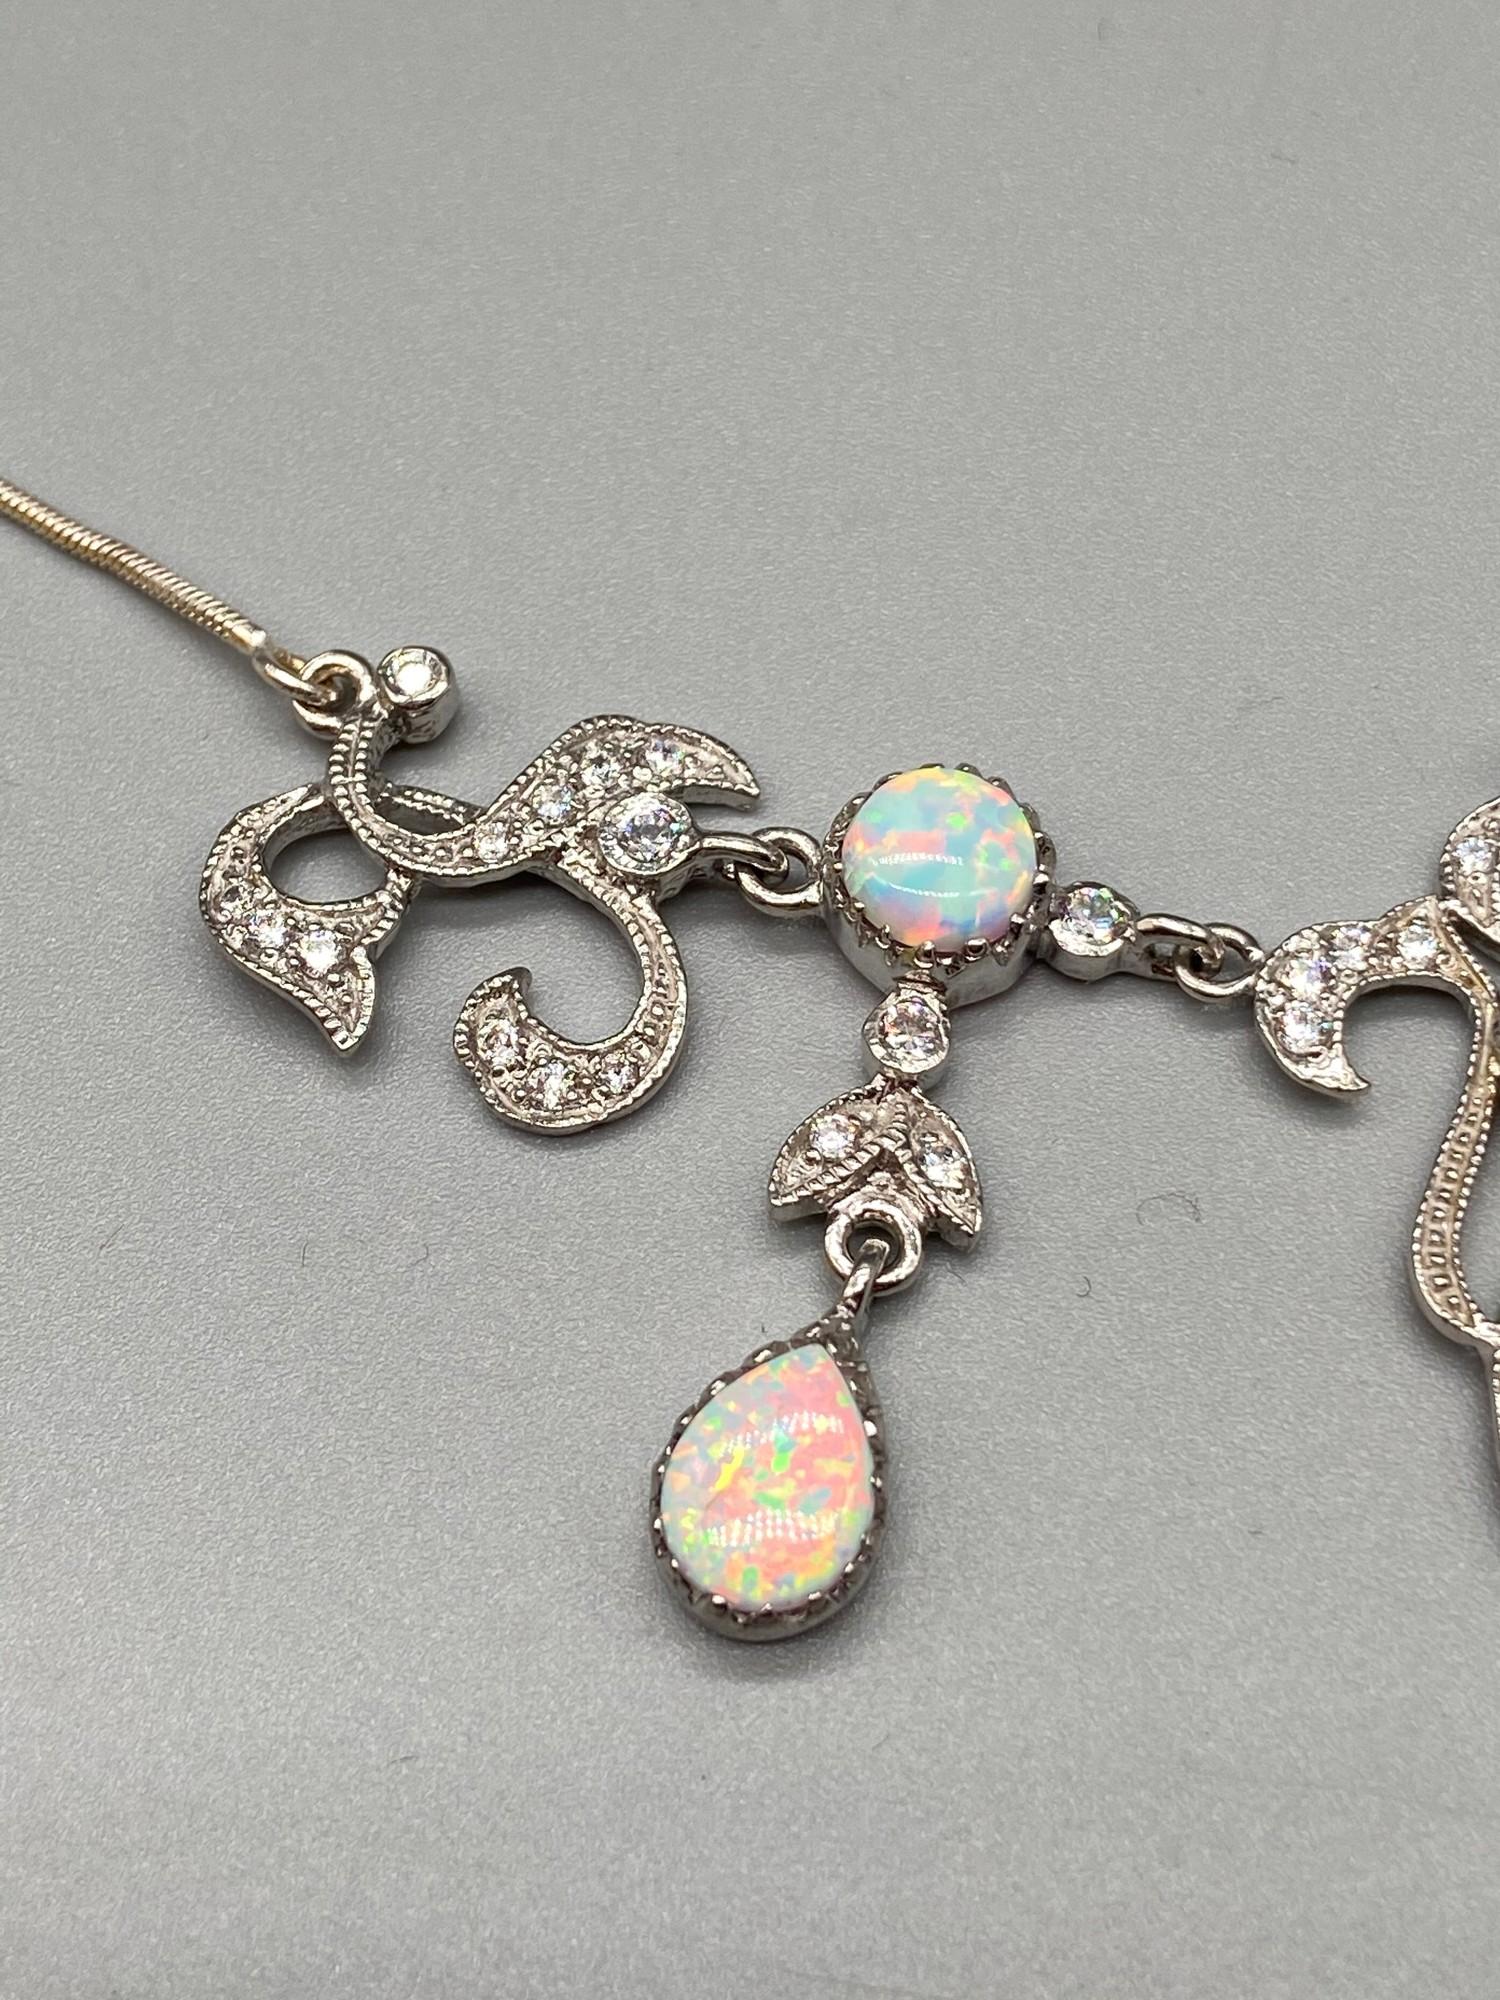 An Impressive silver and opal Belle Epoque style necklace. - Image 2 of 4